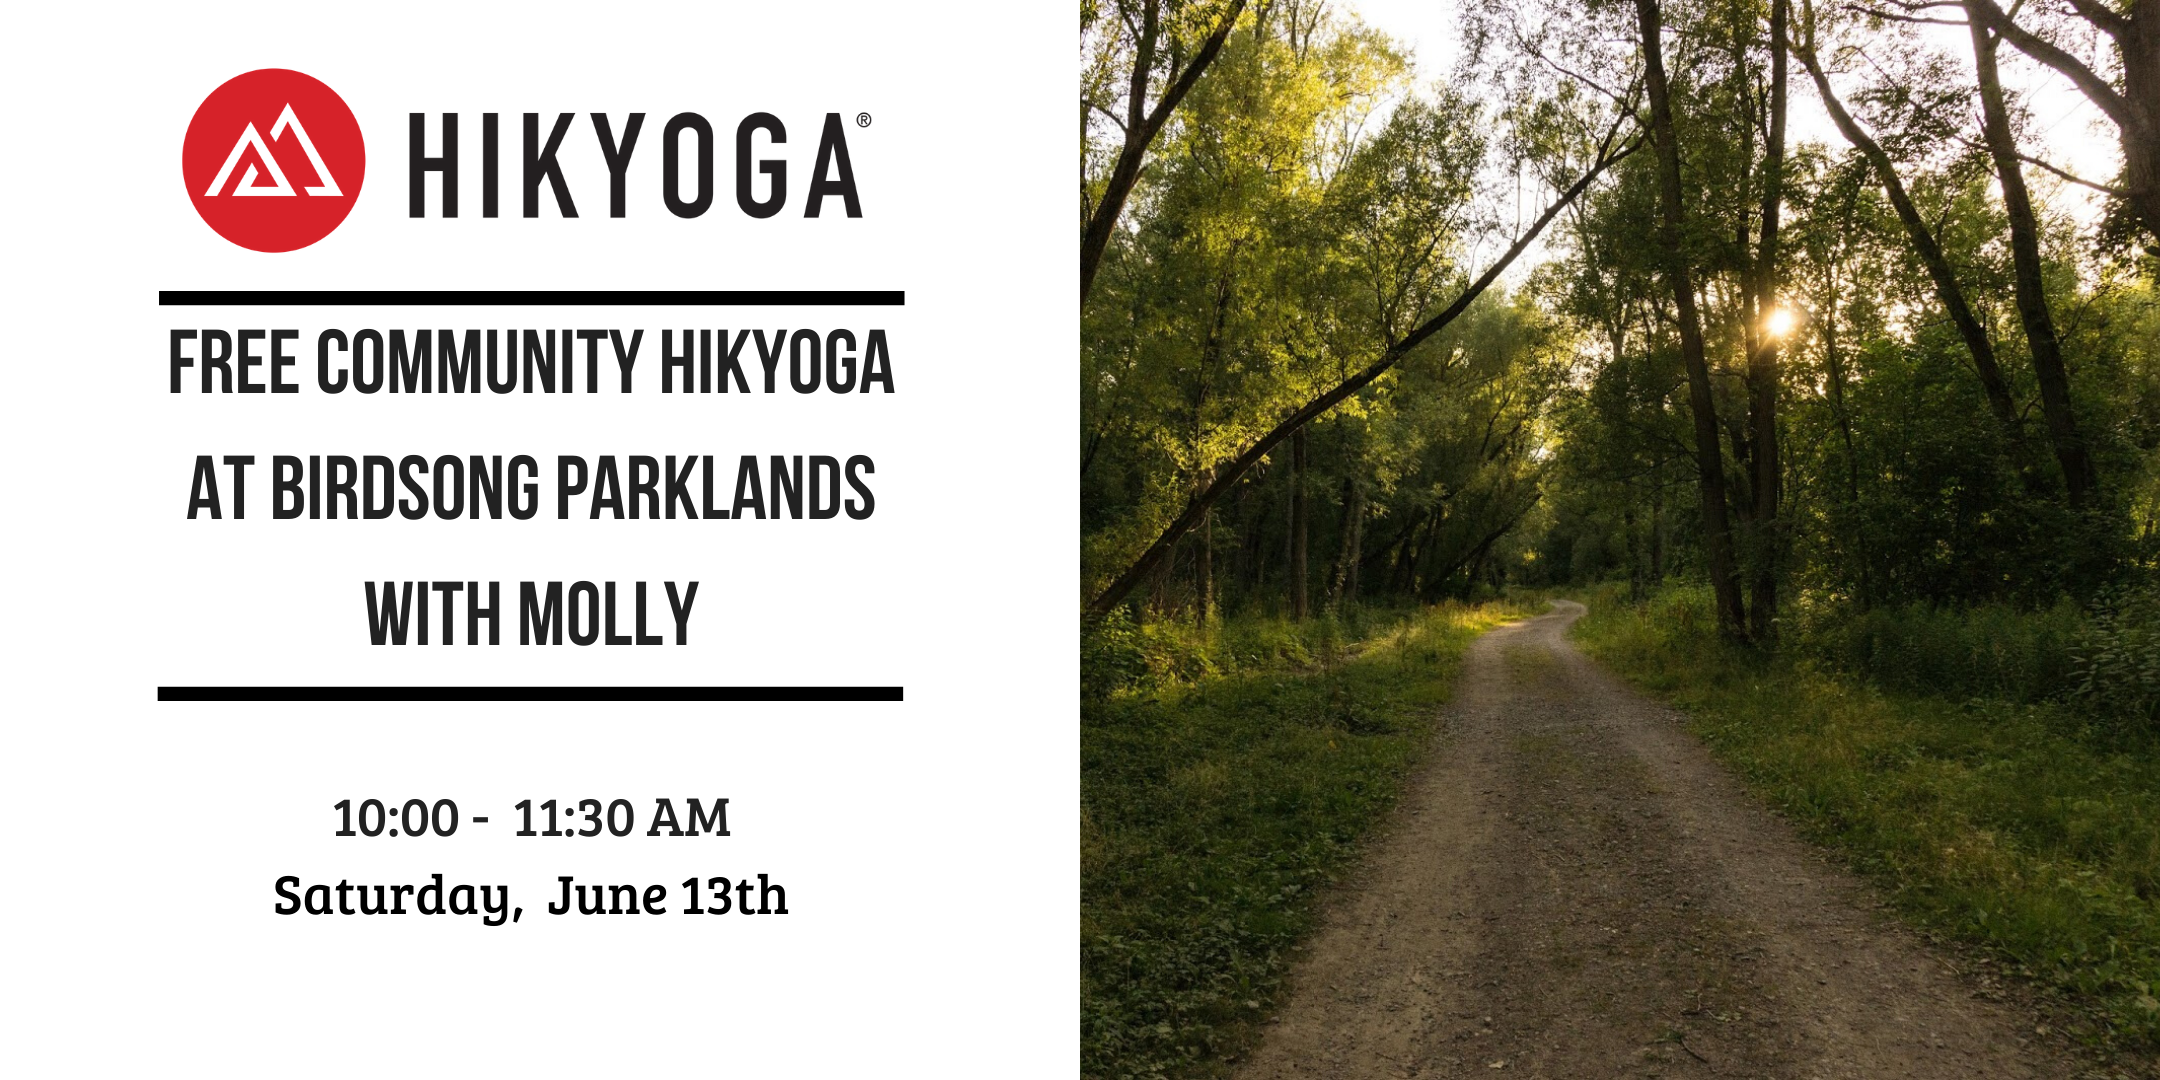 Free Community Hikyoga at Birdsong Parklands with Molly - Hikyoga